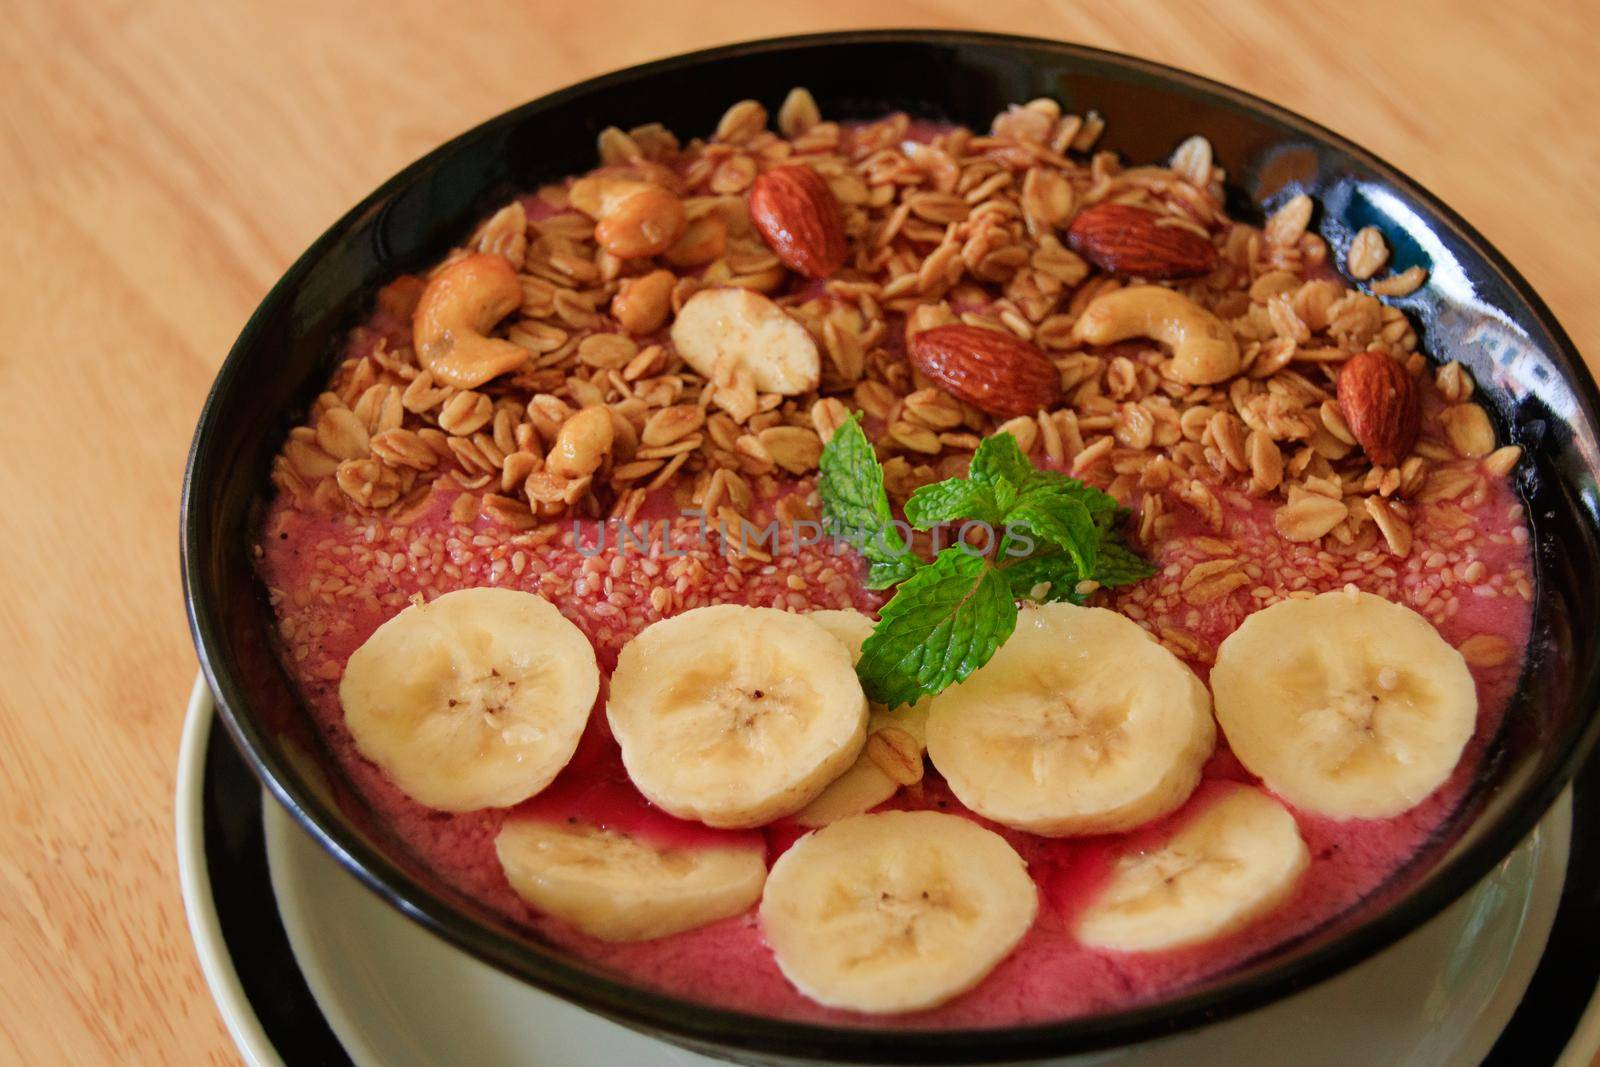 Vegan Smoothie Bowl for Breakfast by Sonnet15